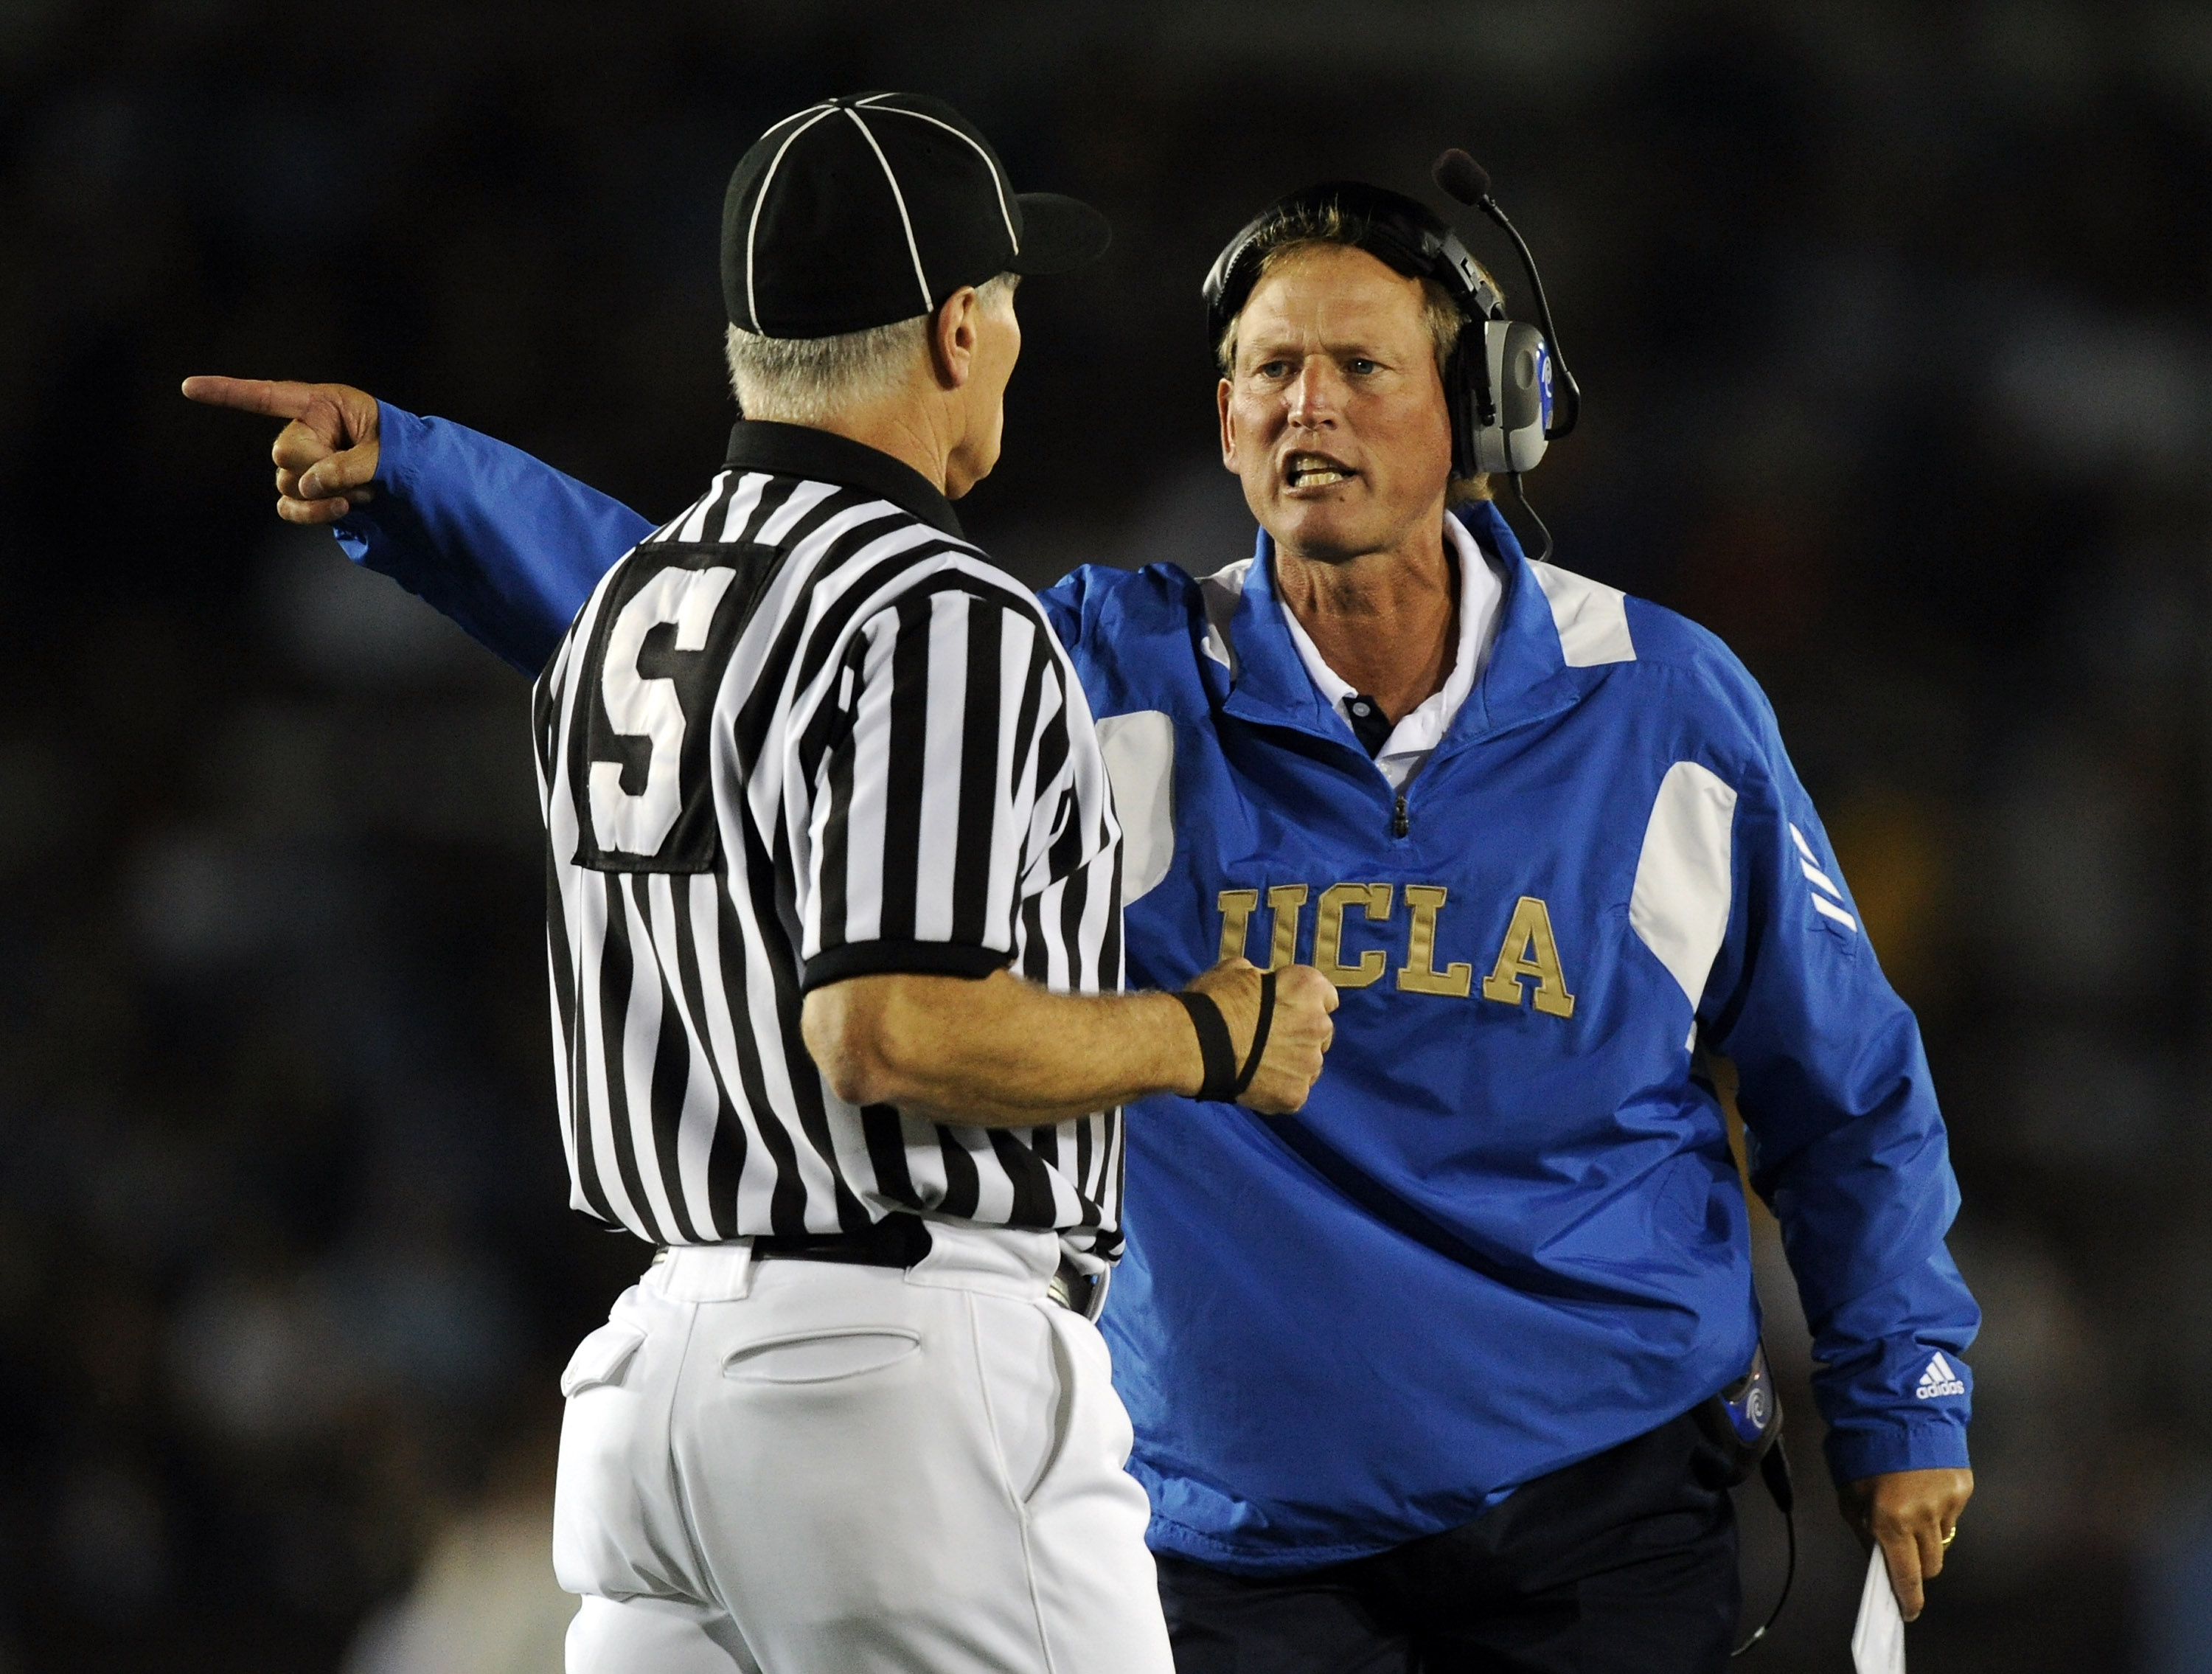 PASADENA, CA - SEPTEMBER 11:  Head Coach Rick Neuheisel of UCLA yells at the referee during the second quarter against Stanford at the Rose Bowl on September 11, 2010 in Pasadena, California.  (Photo by Harry How/Getty Images)